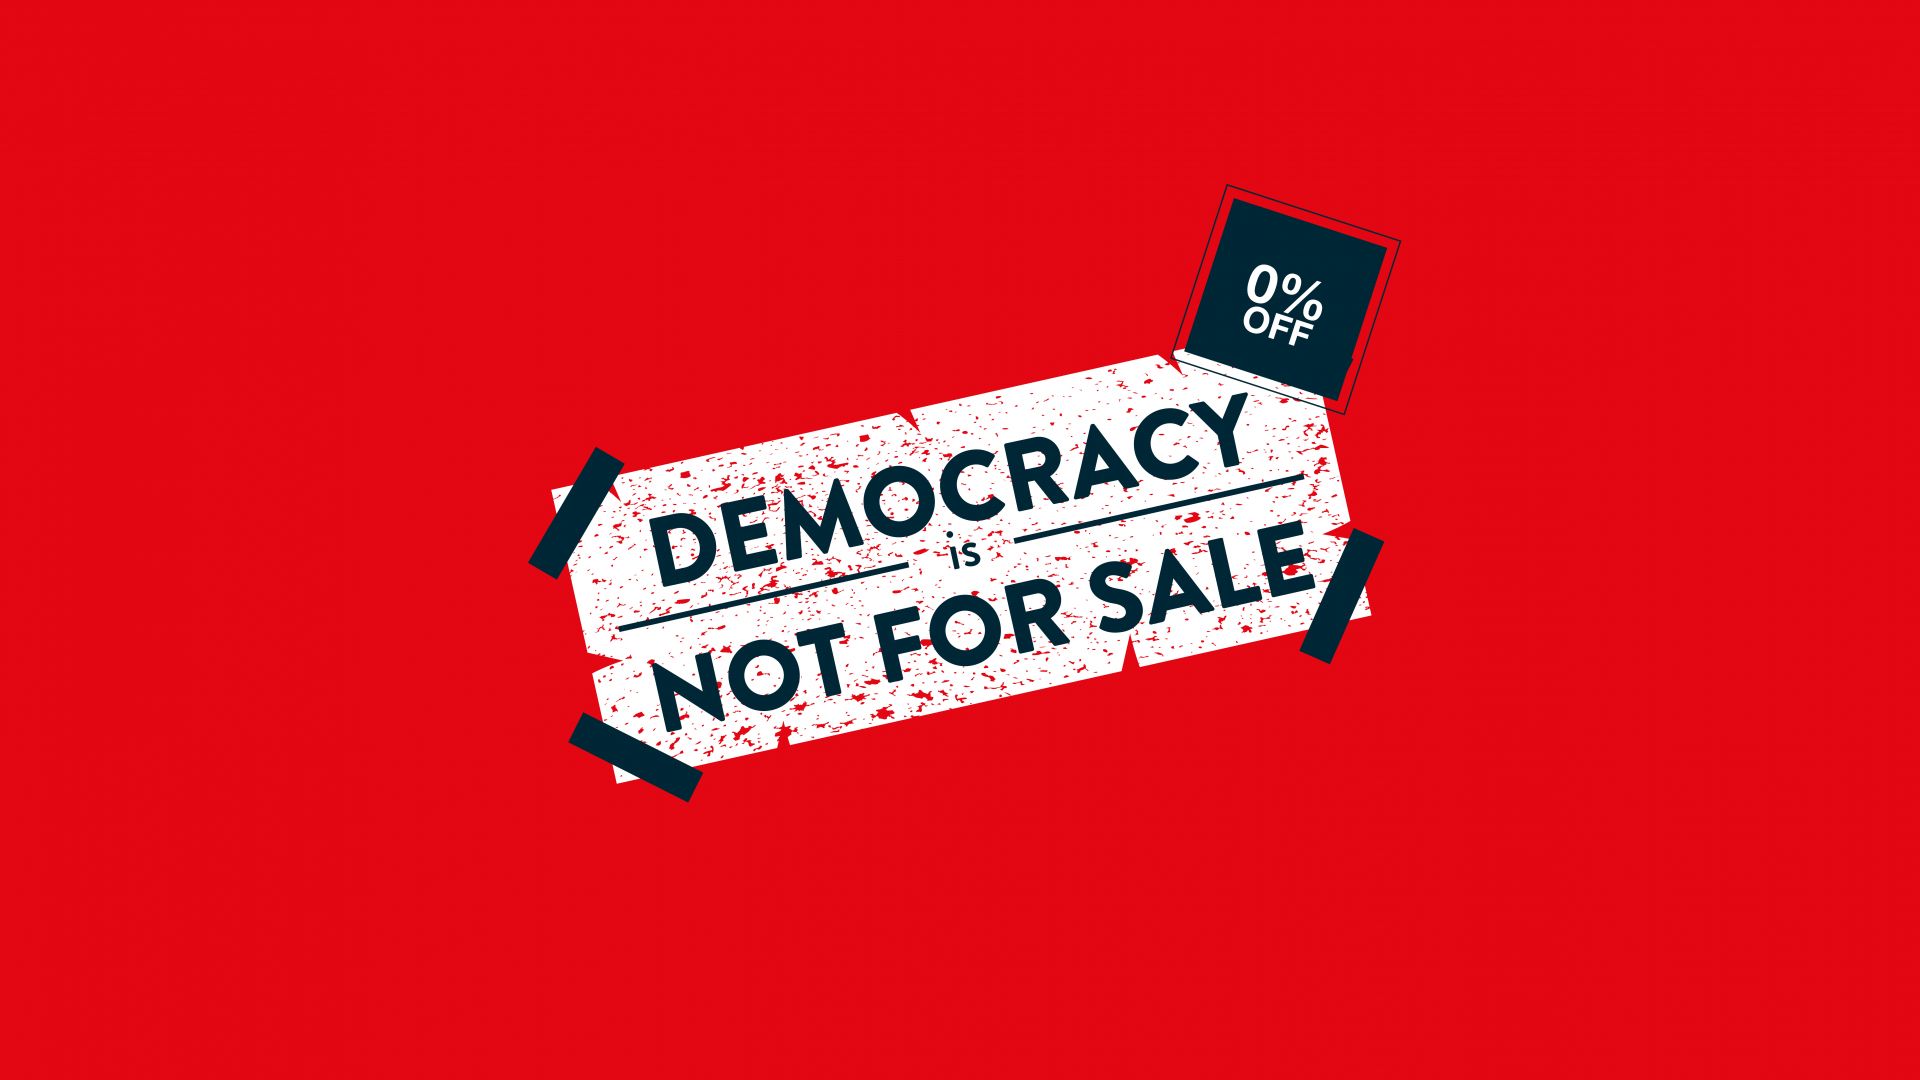 S&D online event: European democracy is not for sale